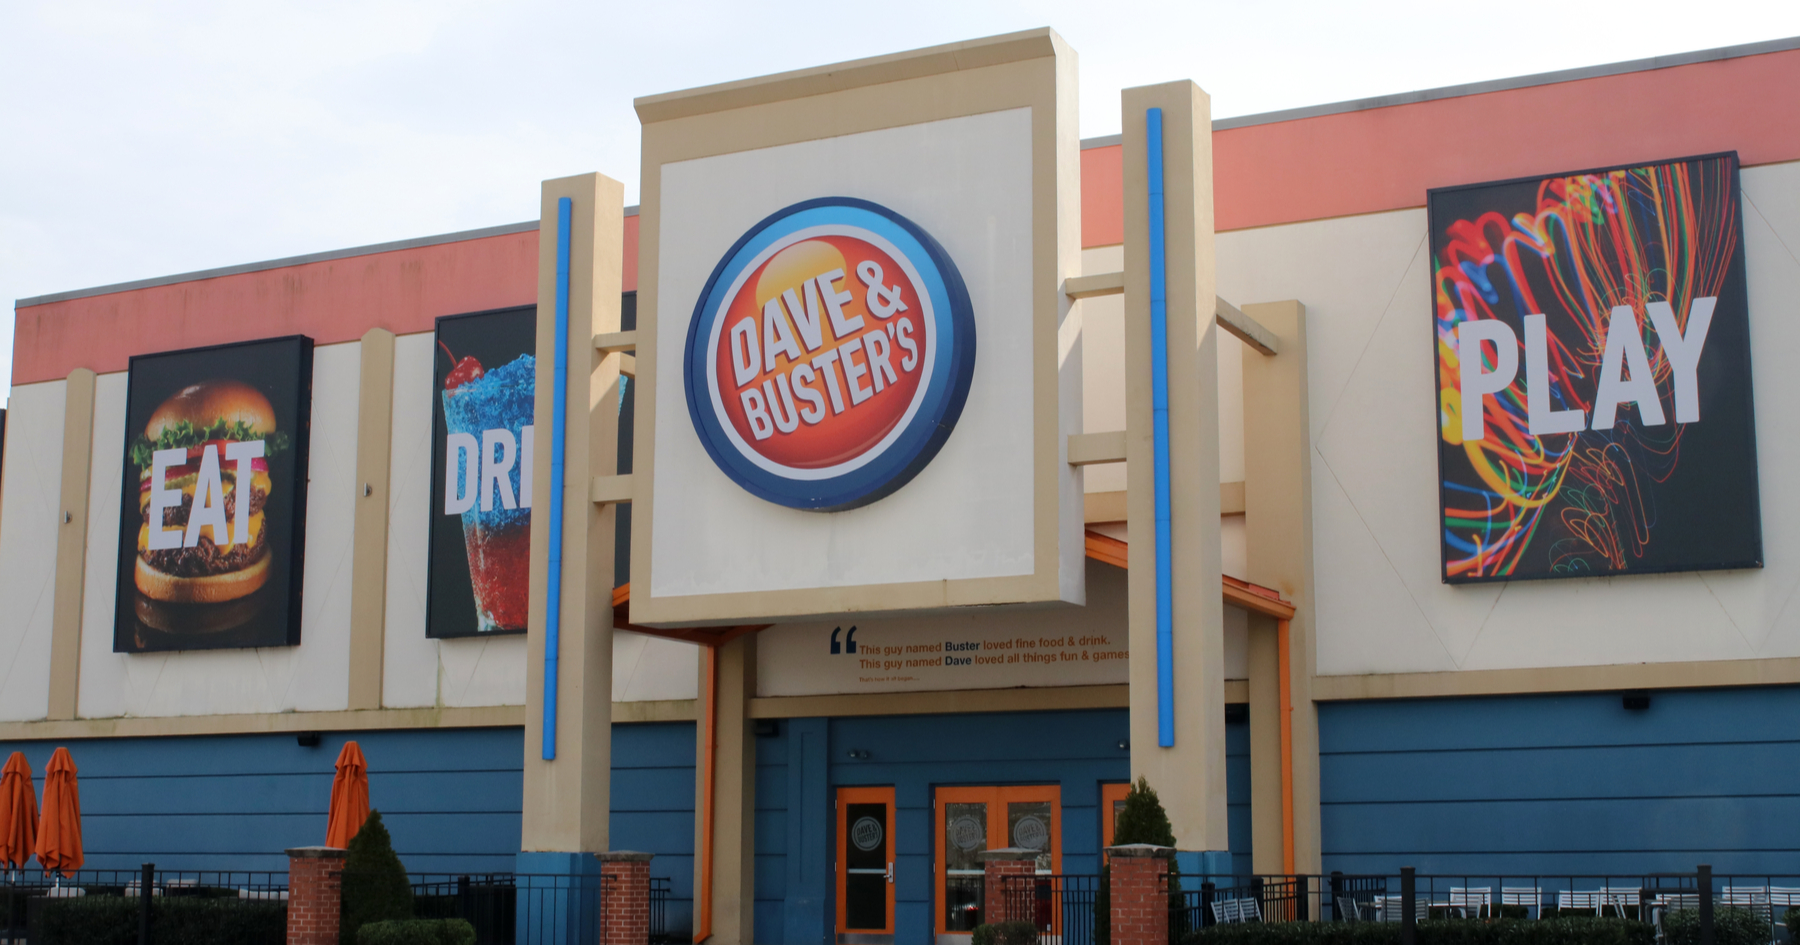 How To Save Money At Dave And Busters: 12 Tips